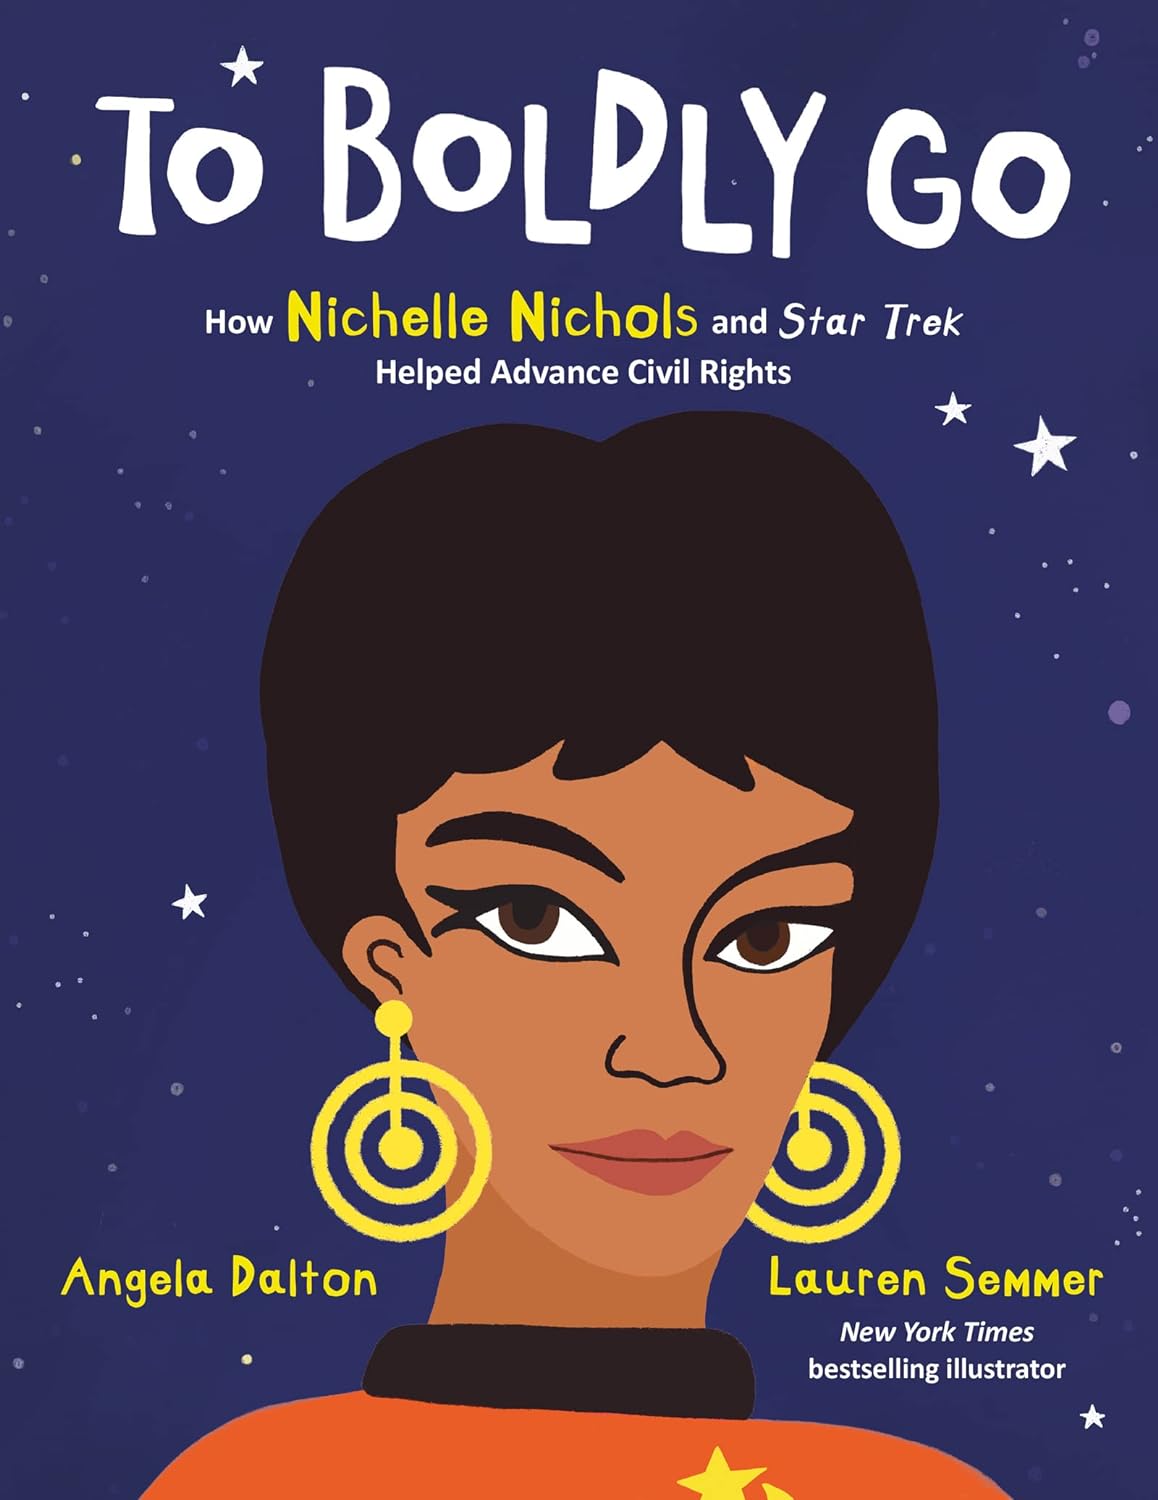 To Boldly Go: How Nichelle Nichols and Star Trek Helped Advance Civil Rights (Hardcover)